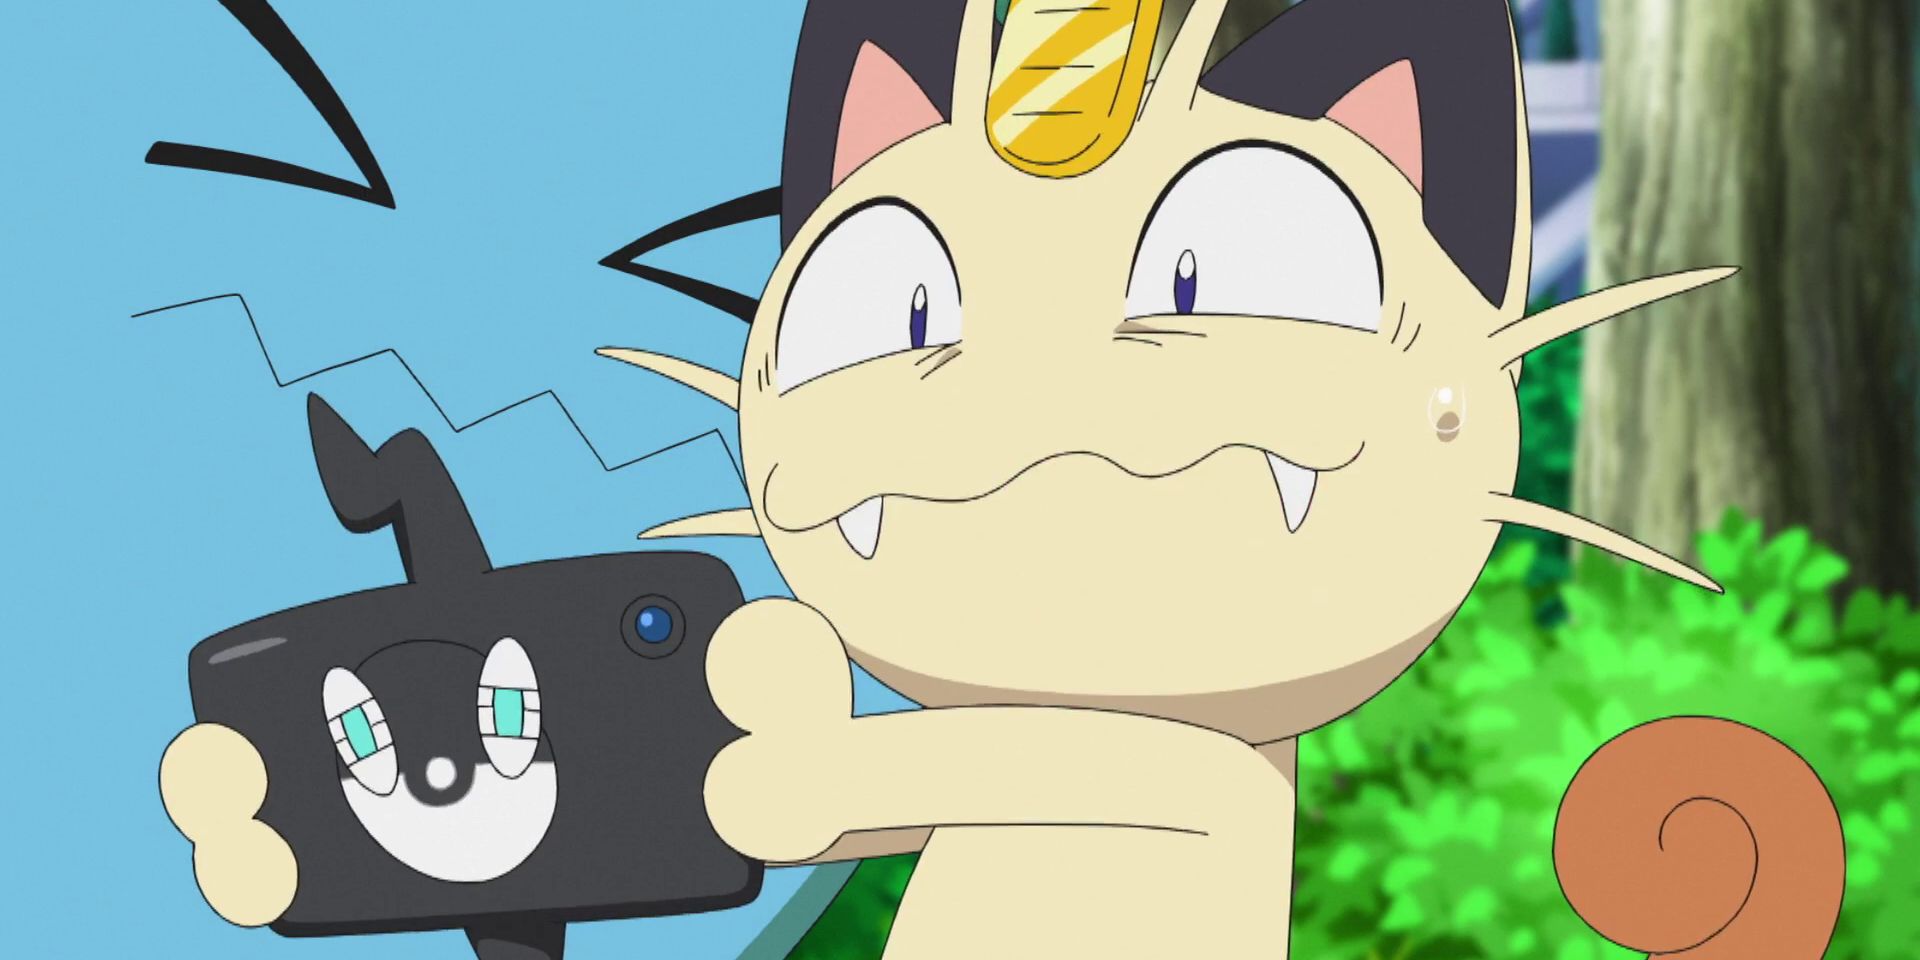 Meowth experiments with Rotom Phone in Pokemon anime